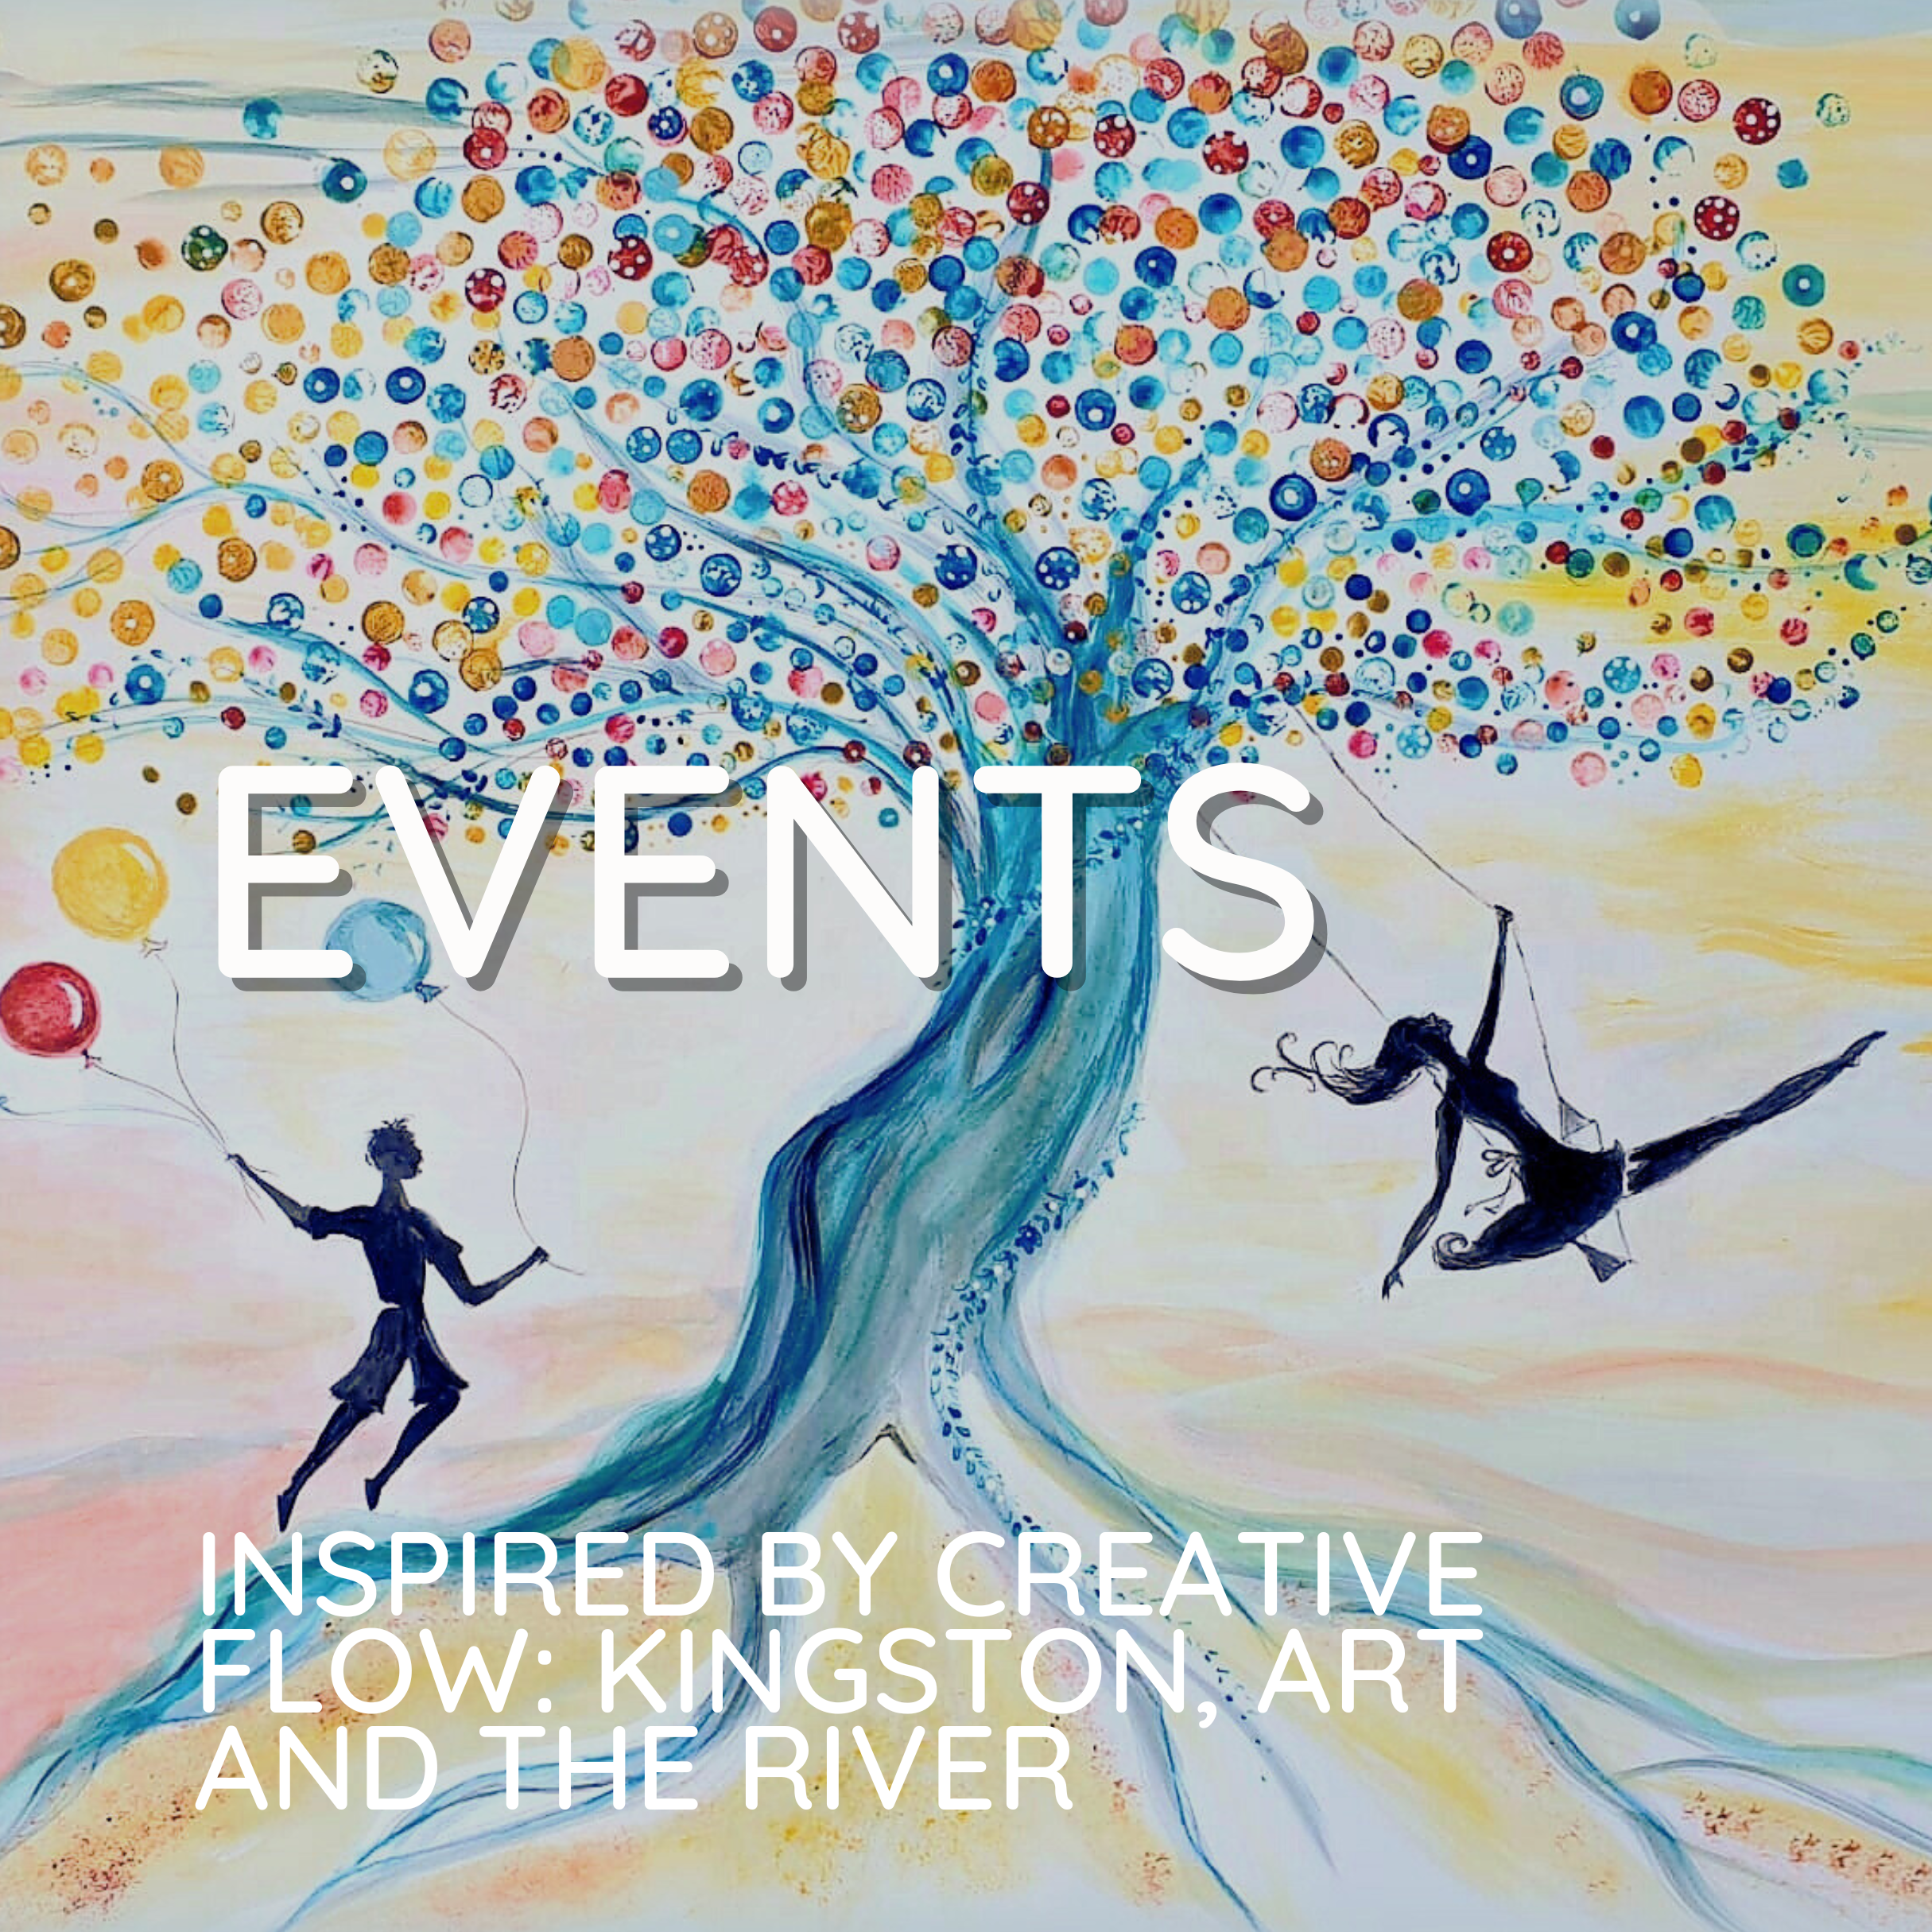 Creative Flow Inspired Events click through link